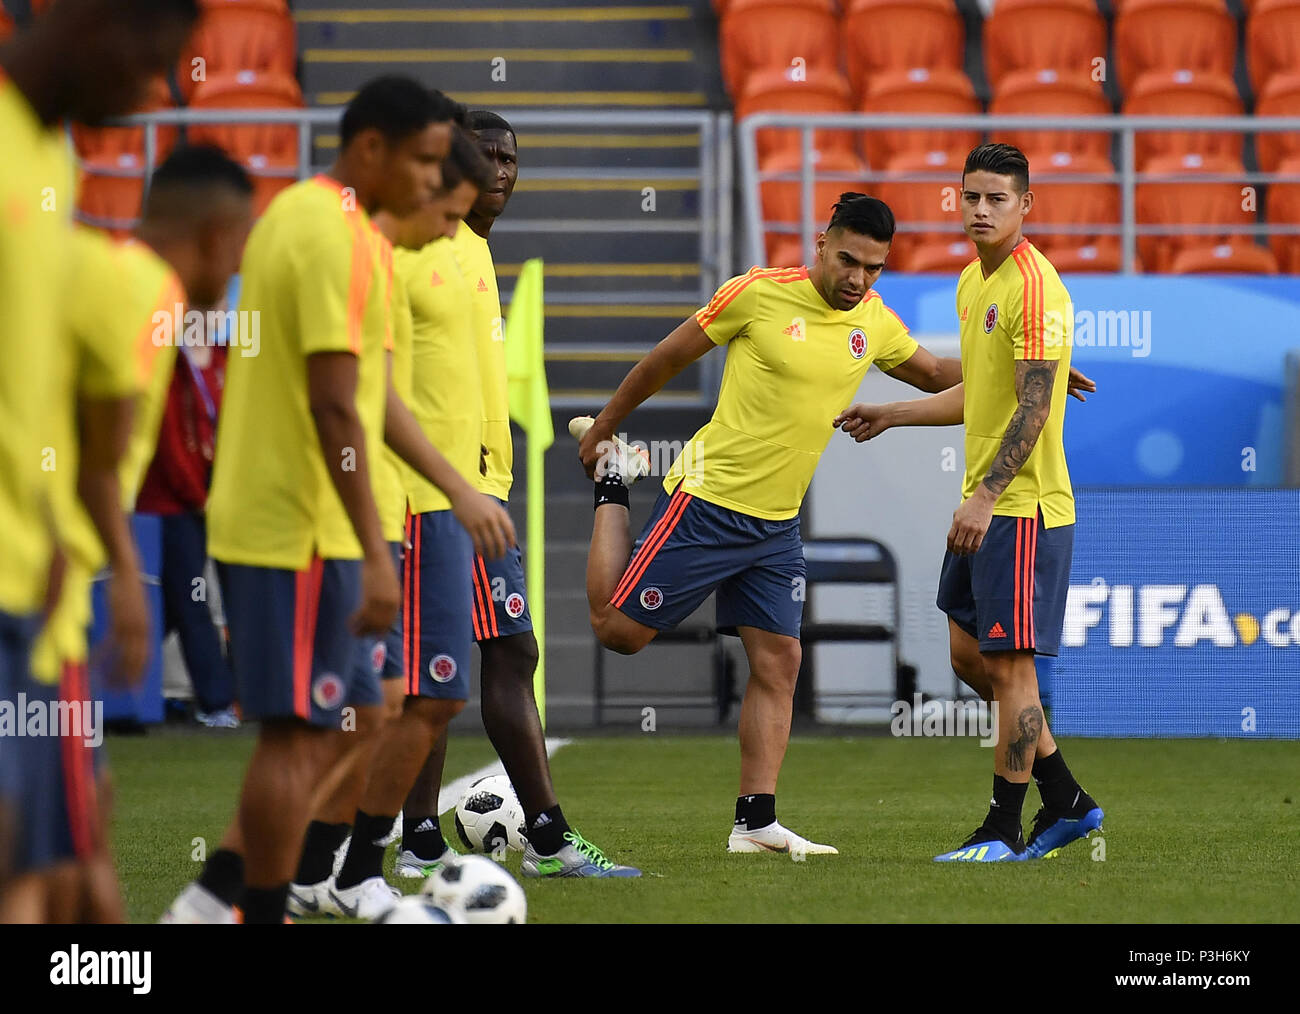 (180618) -- SARANSK, June 18, 2018(Xinhua) -- Colombia's James Rodriguez (1st R) and Radamel Falcao (2nd R) attend a training session prior to a group H match against Japan at the 2018 FIFA World Cup in Saransk, Russia, on June 18, 2018. (Xinhua/He Canling) Stock Photo